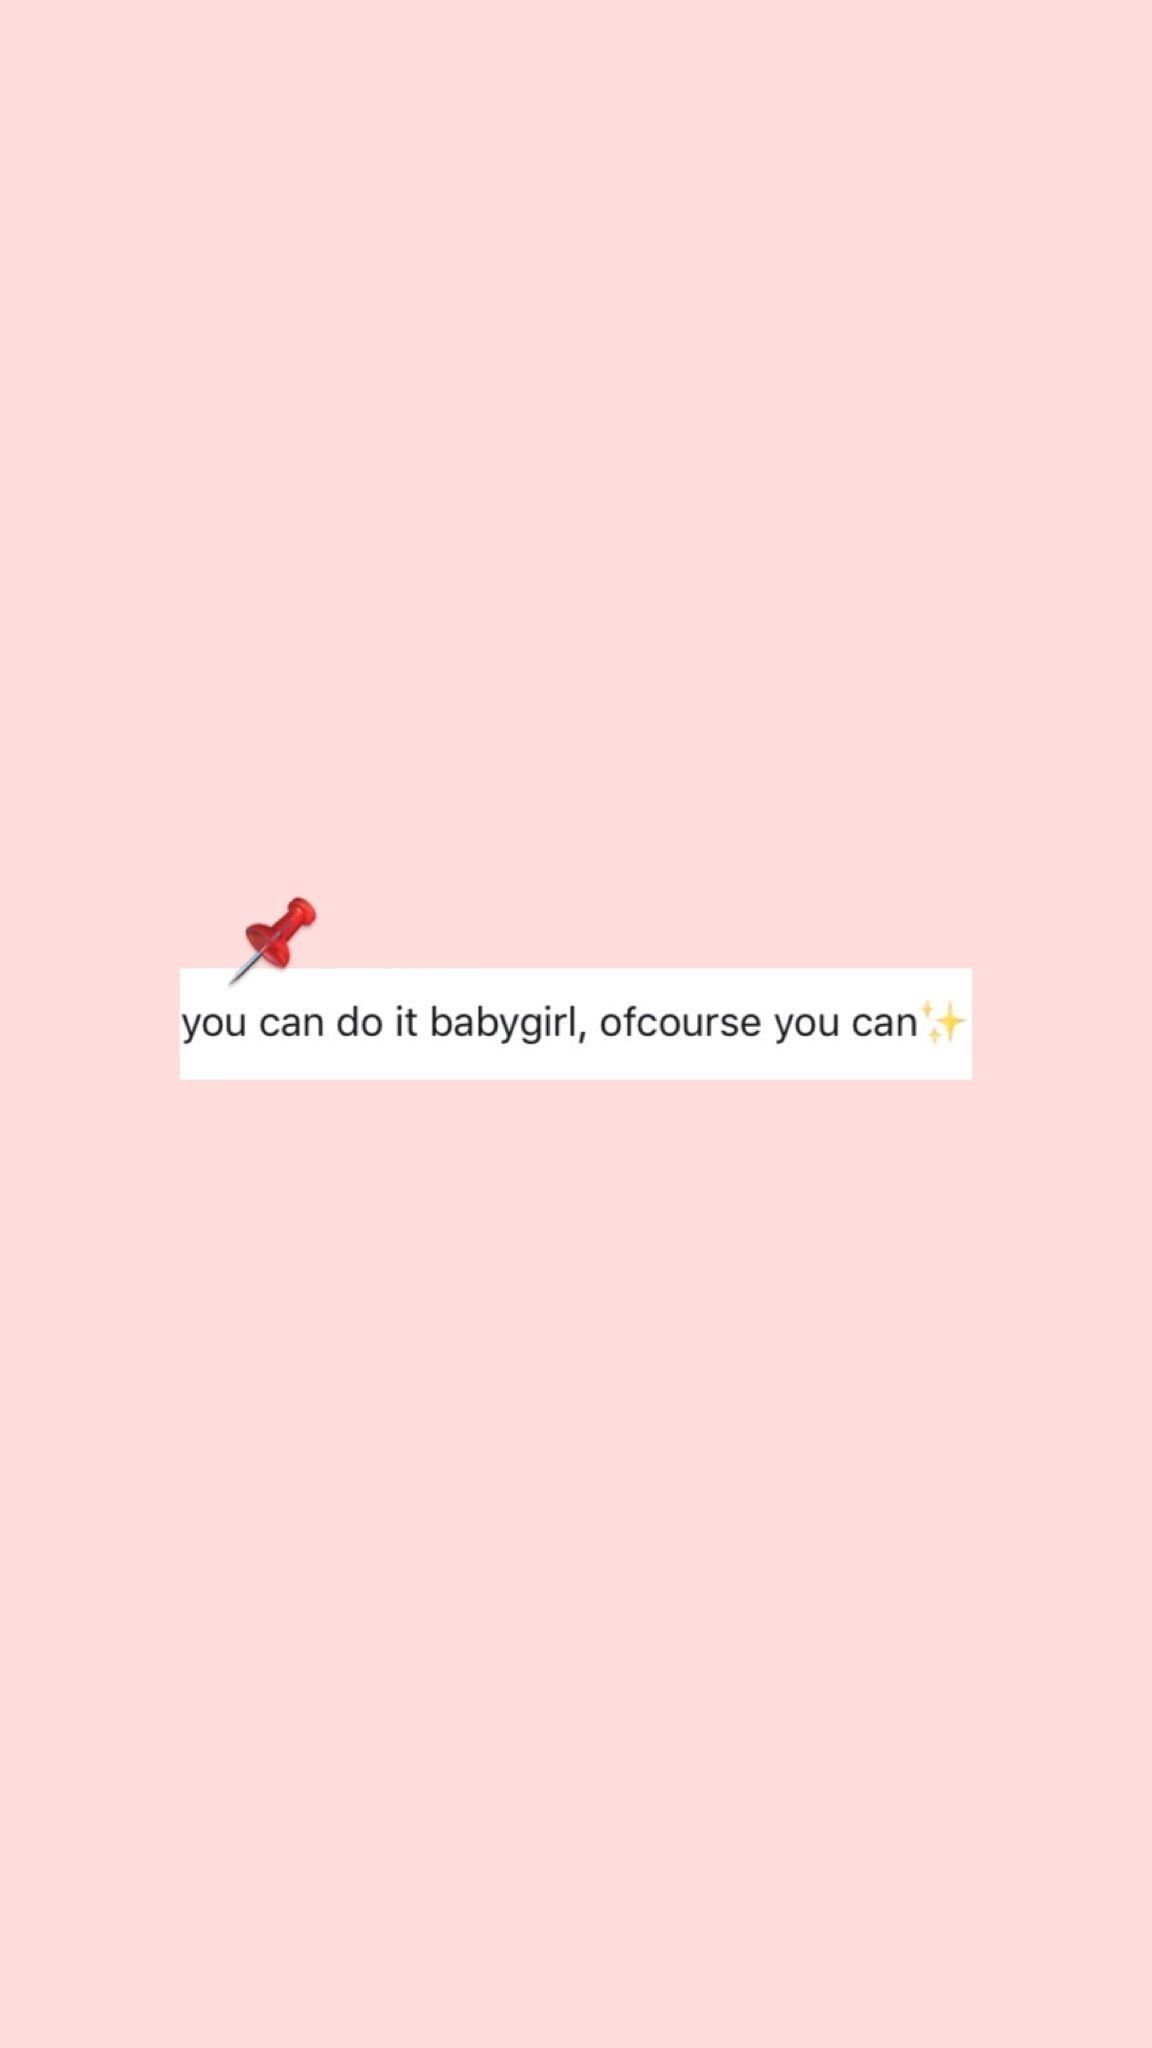 A pink background with a red bird in the top left corner and the words 